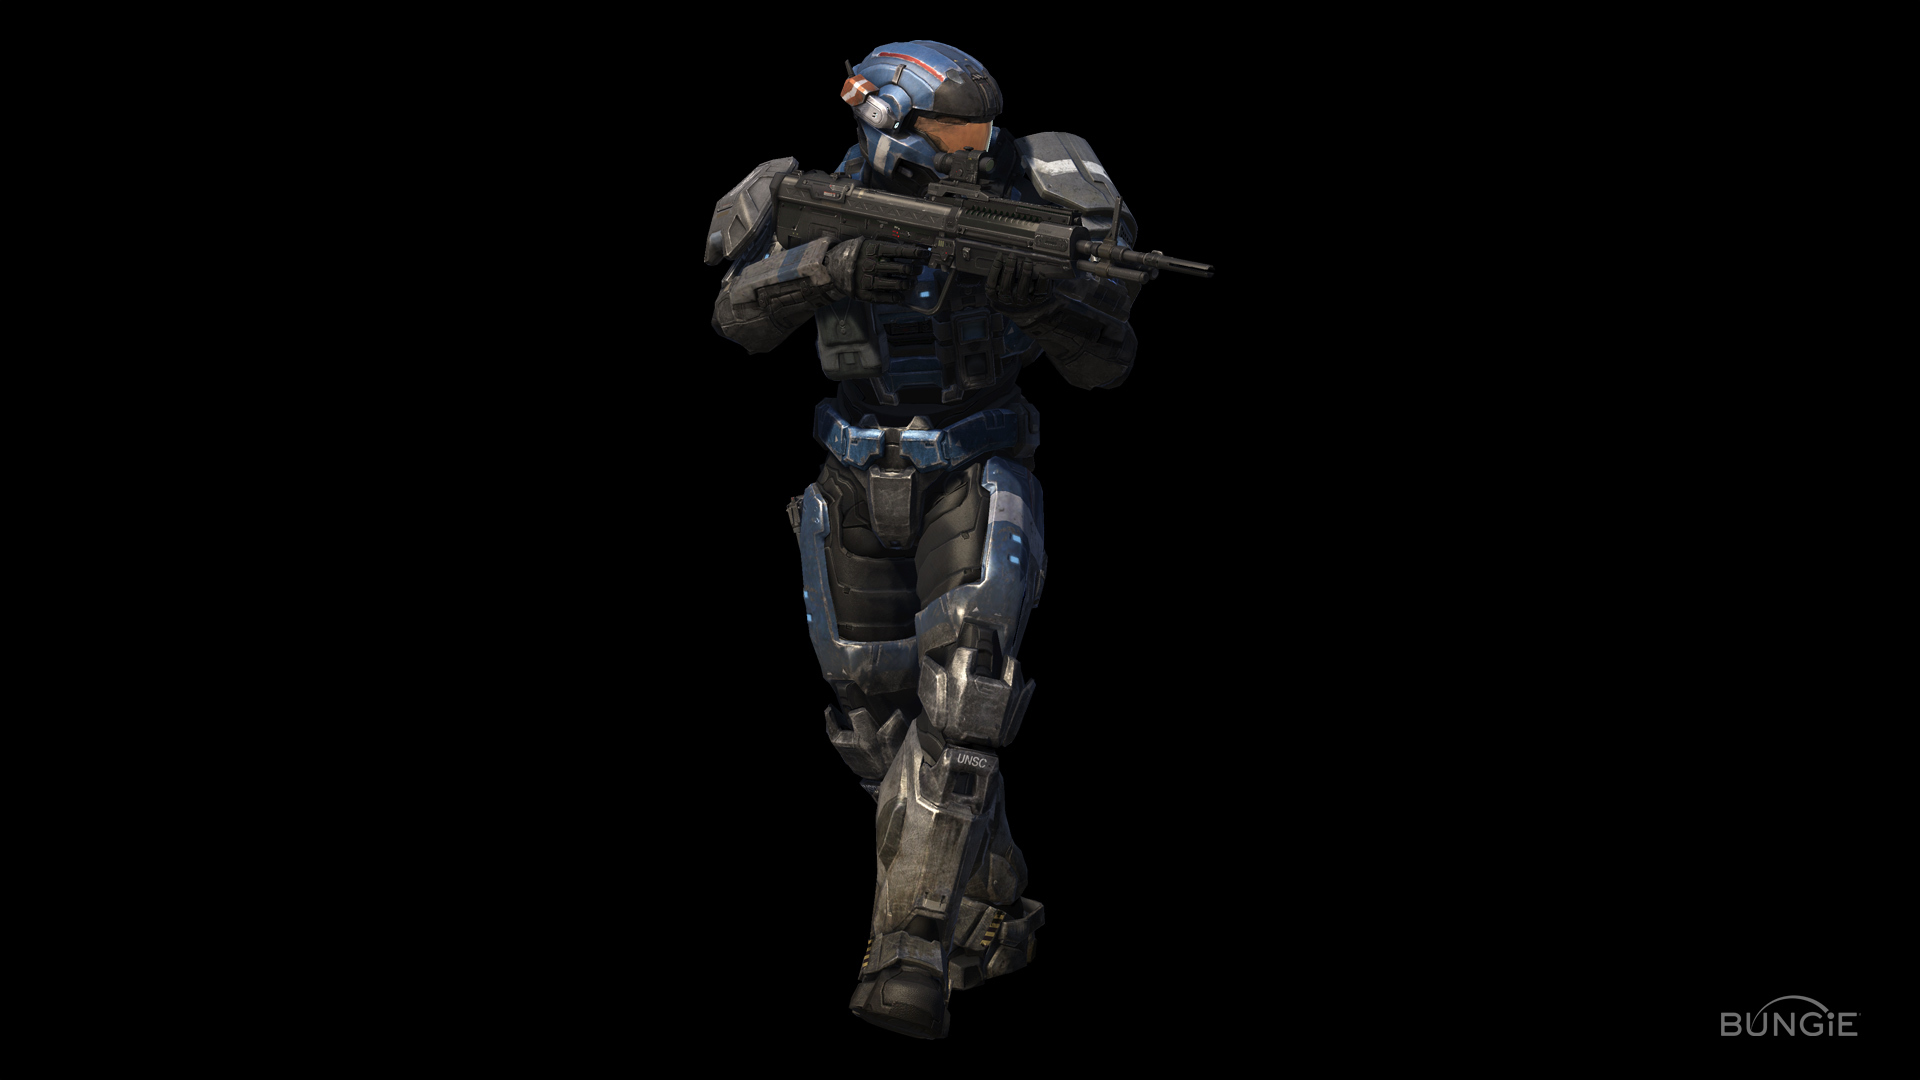 Halo Reach Background on Halo Reach Hd Wallpaper   Games   804240